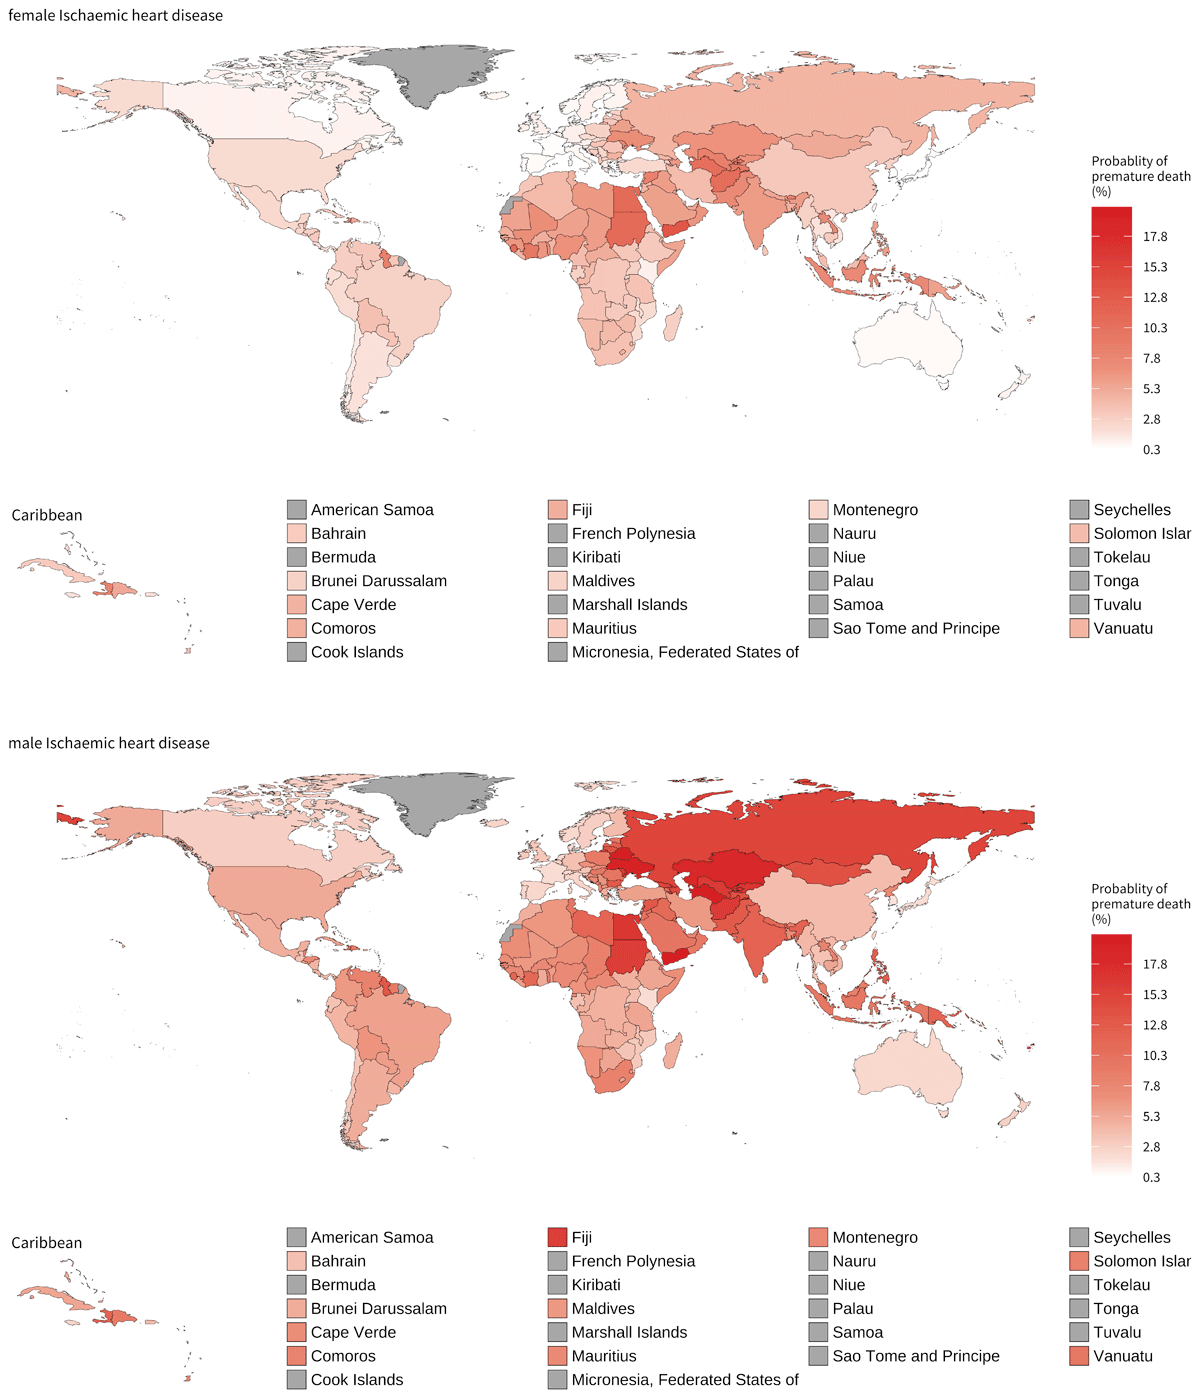 Probability of dying (reported as a percentage) in 2015 between 30 years and 70 years of age from ischaemic heart disease by sex